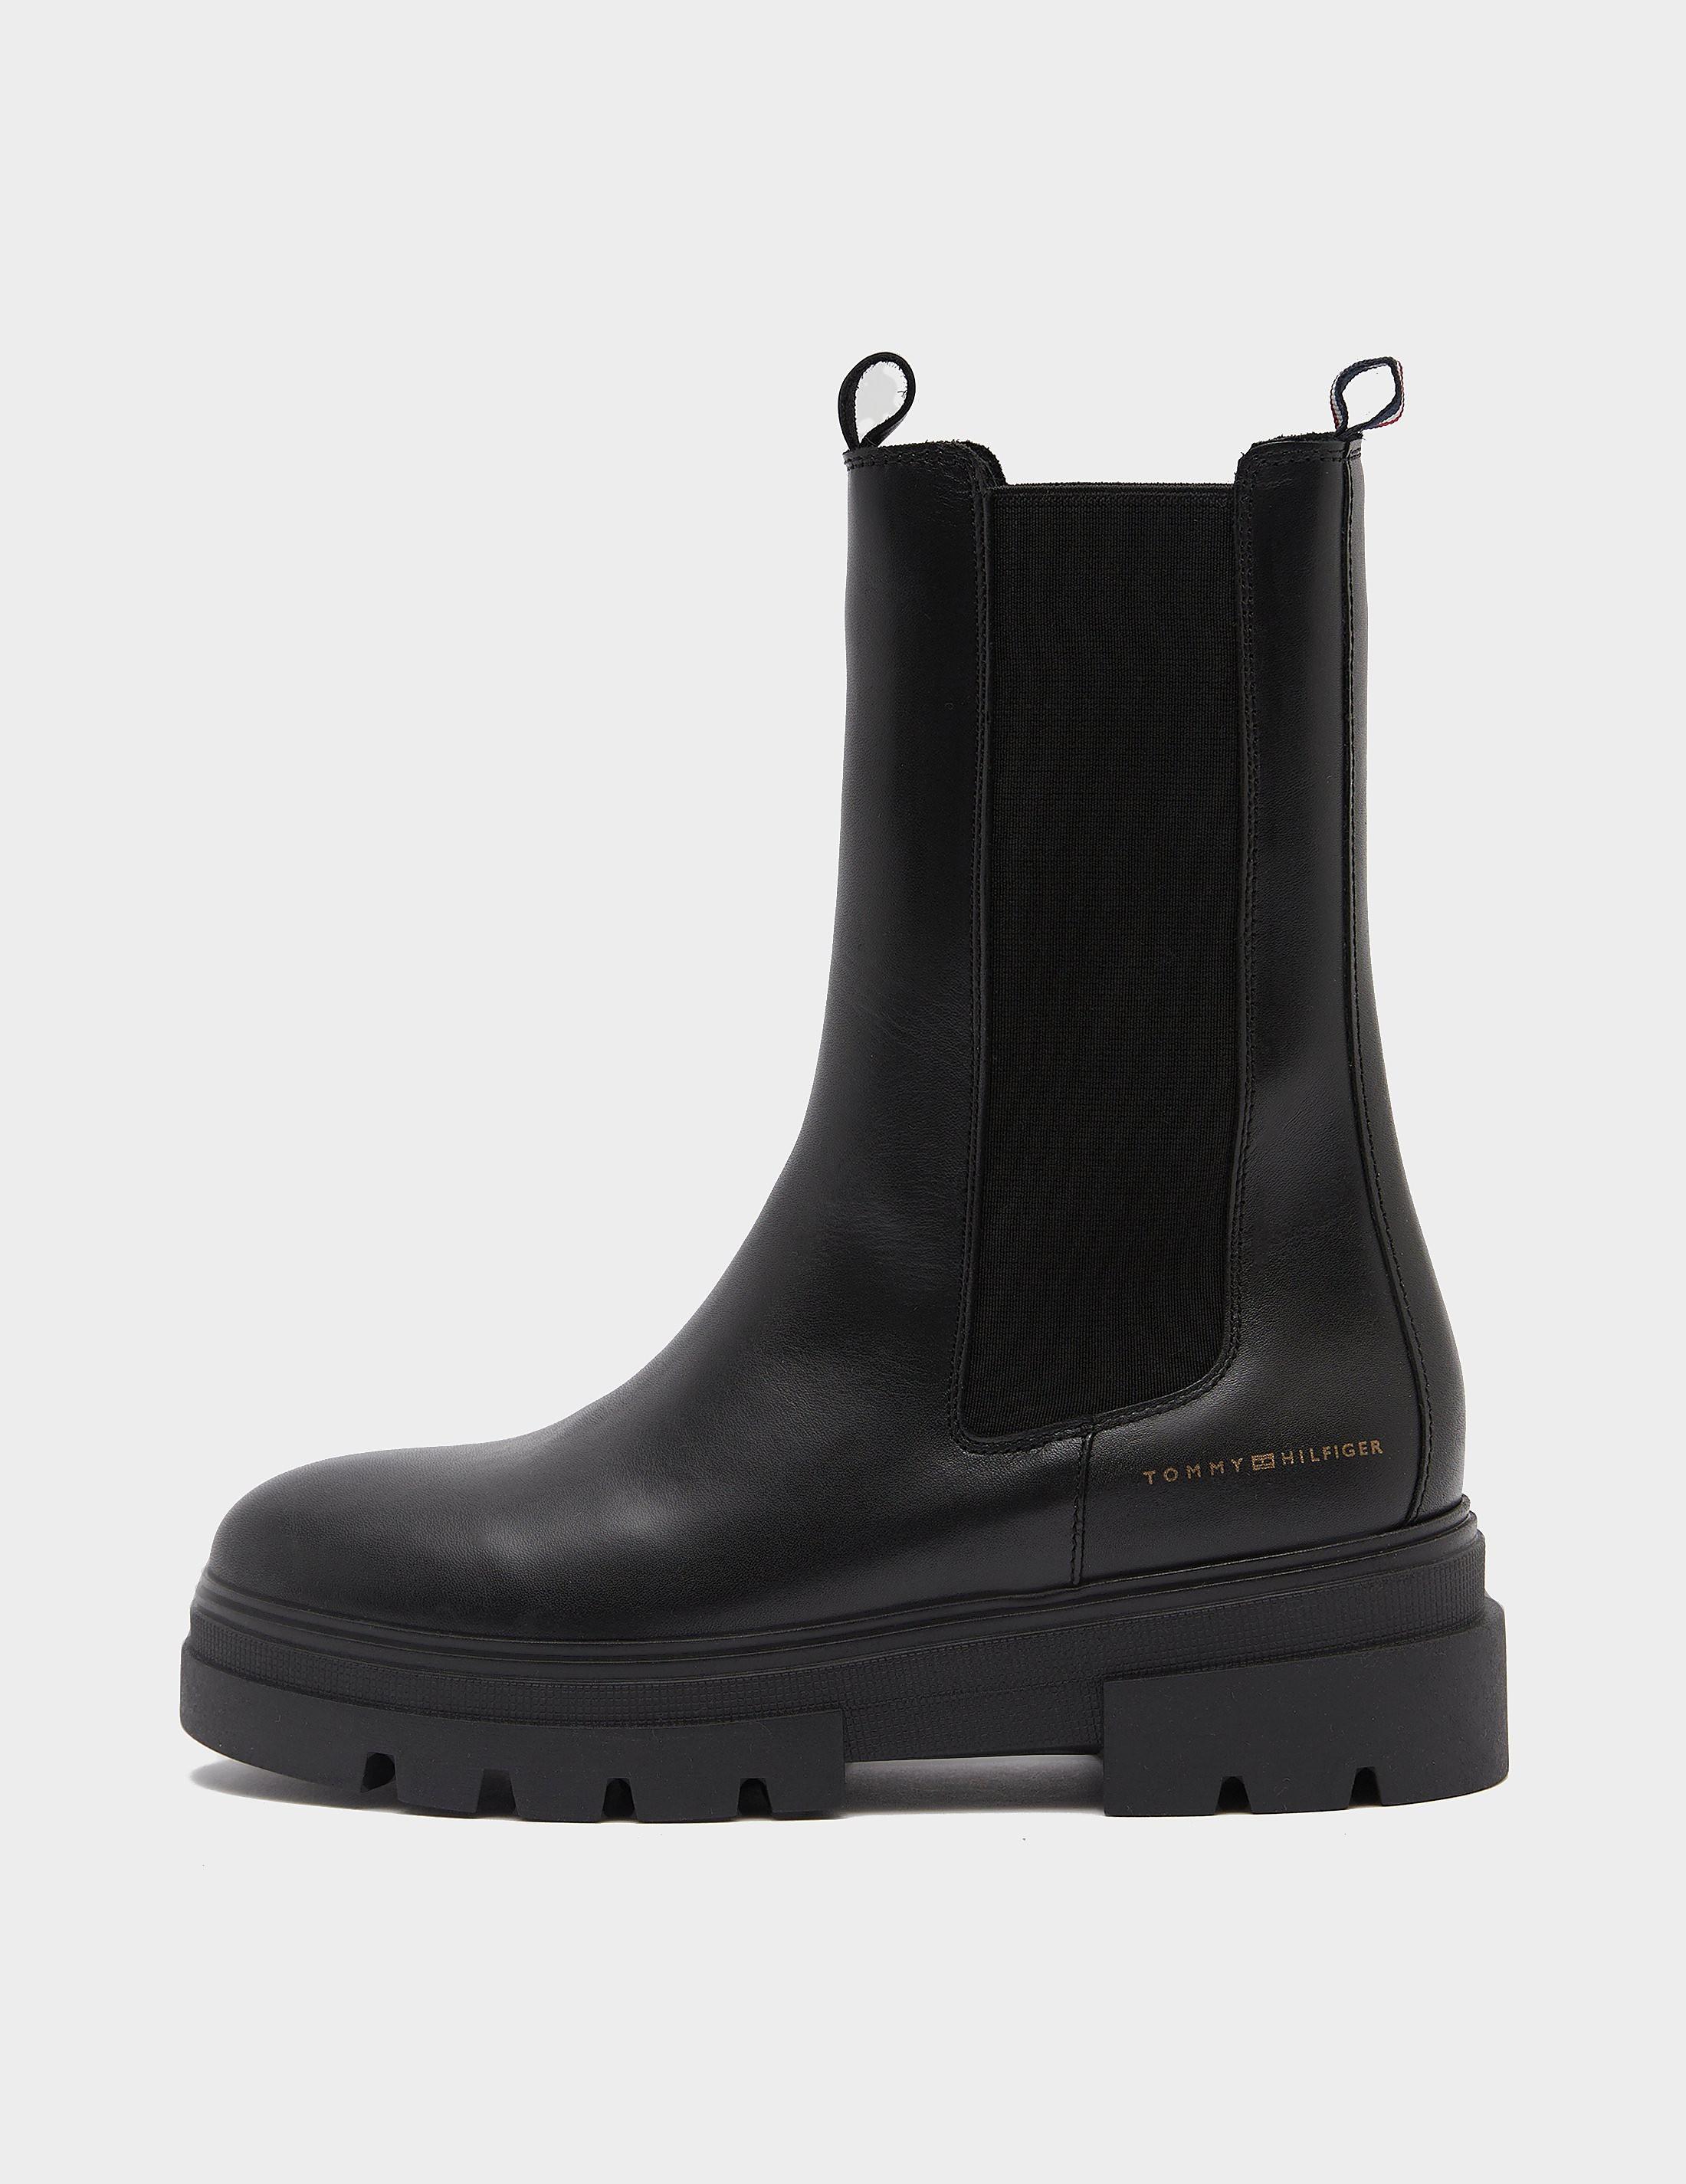 Tommy Hilfiger Monogram Chelsea Boots in Black | Lyst